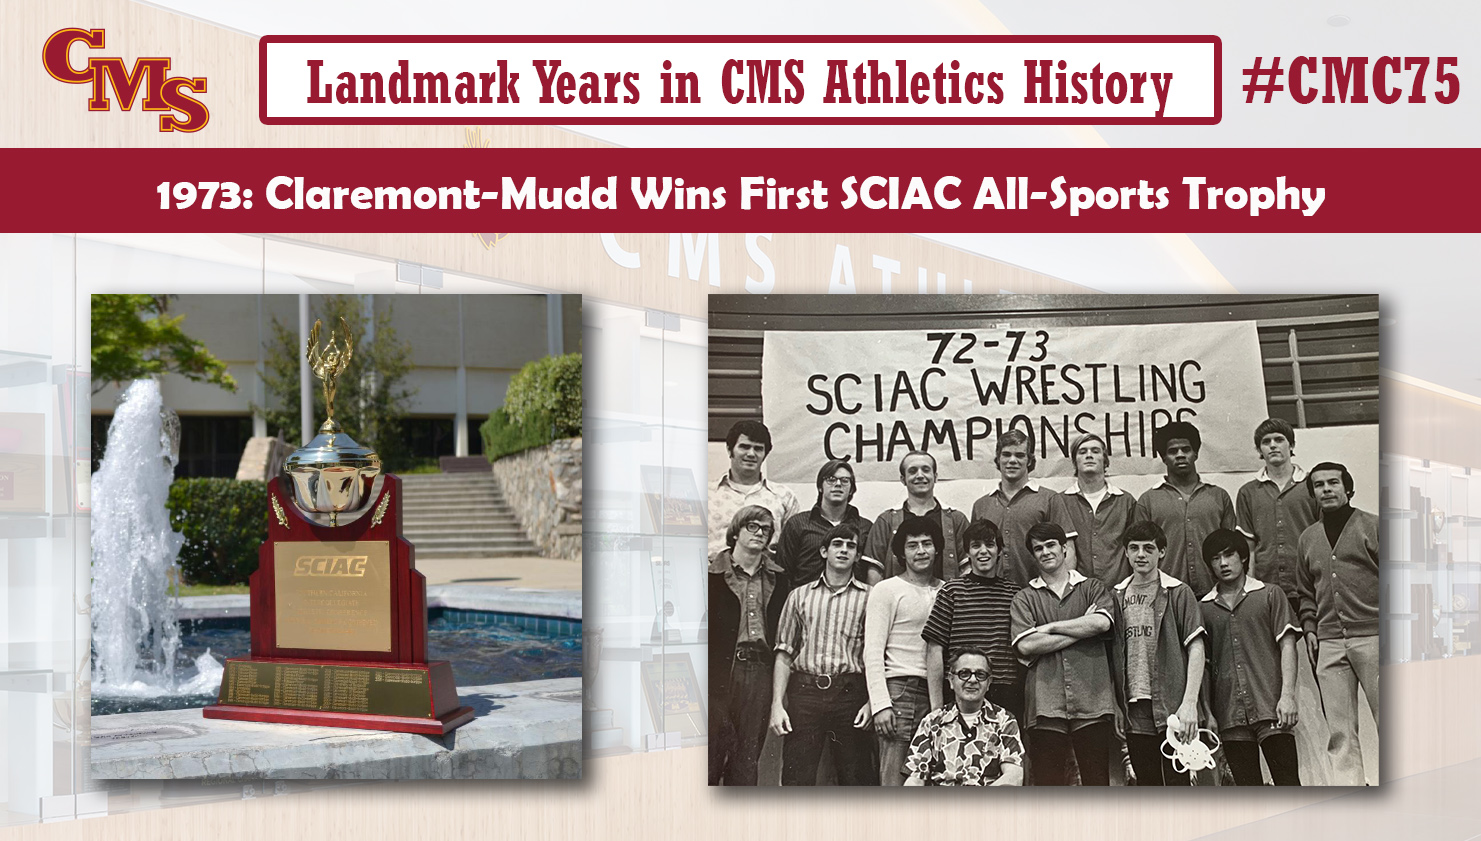 L: The SCIAC All-Sports Trophy R: The 1972-73 wrestling team which won SCIACs